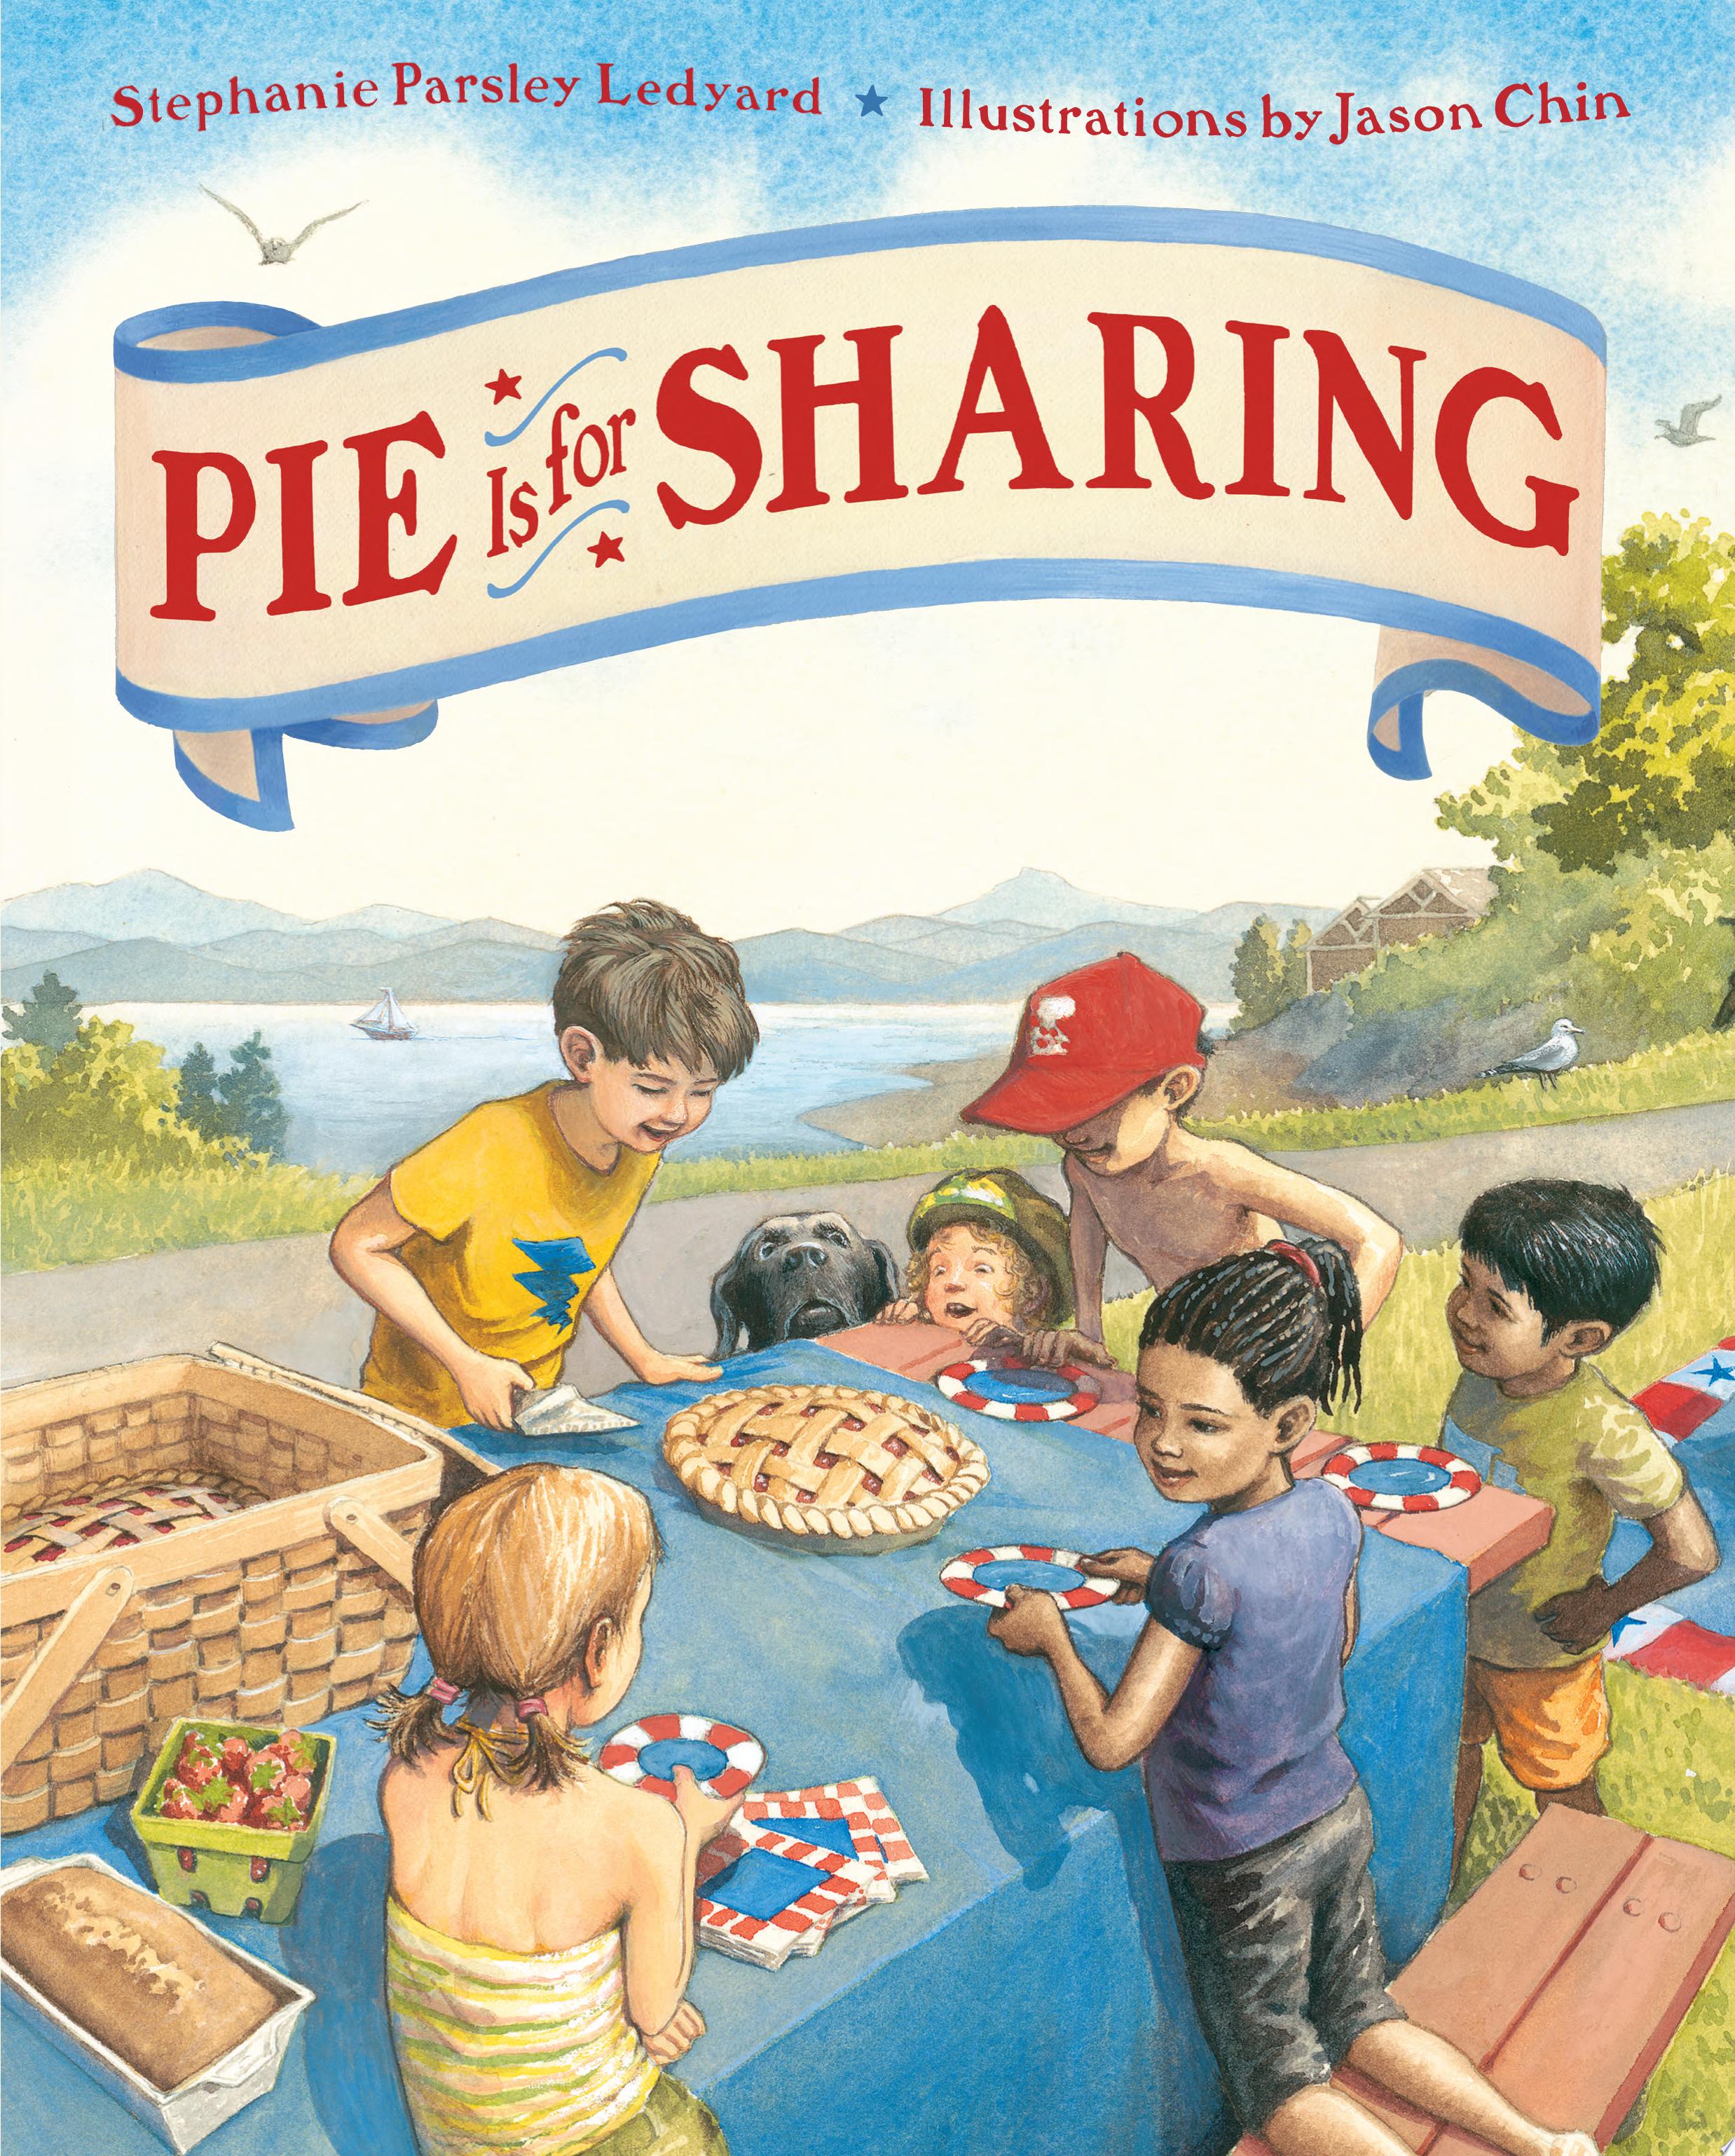 Image for "Pie Is for Sharing"